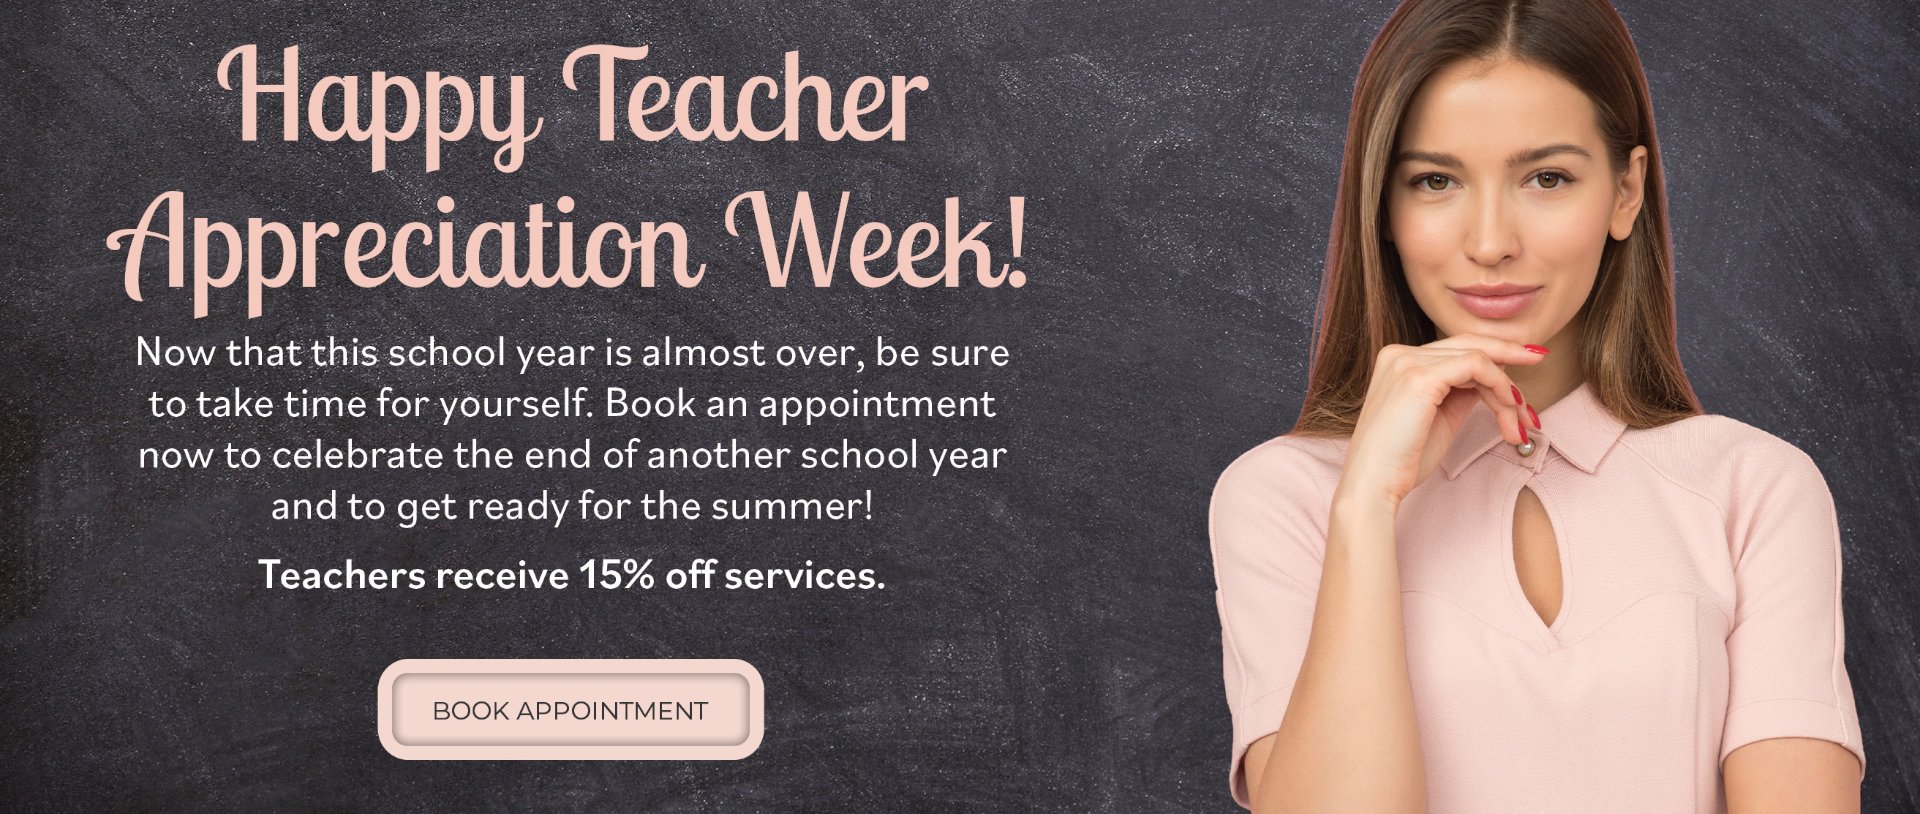 Happy Teacher Appreciation Week! Now that this school year is almost over, be sure to take time for yourself. Book an appointment now to celebrate the end of another school year and to get ready for the summer! Teachers receive 15% off services. Book appointment.